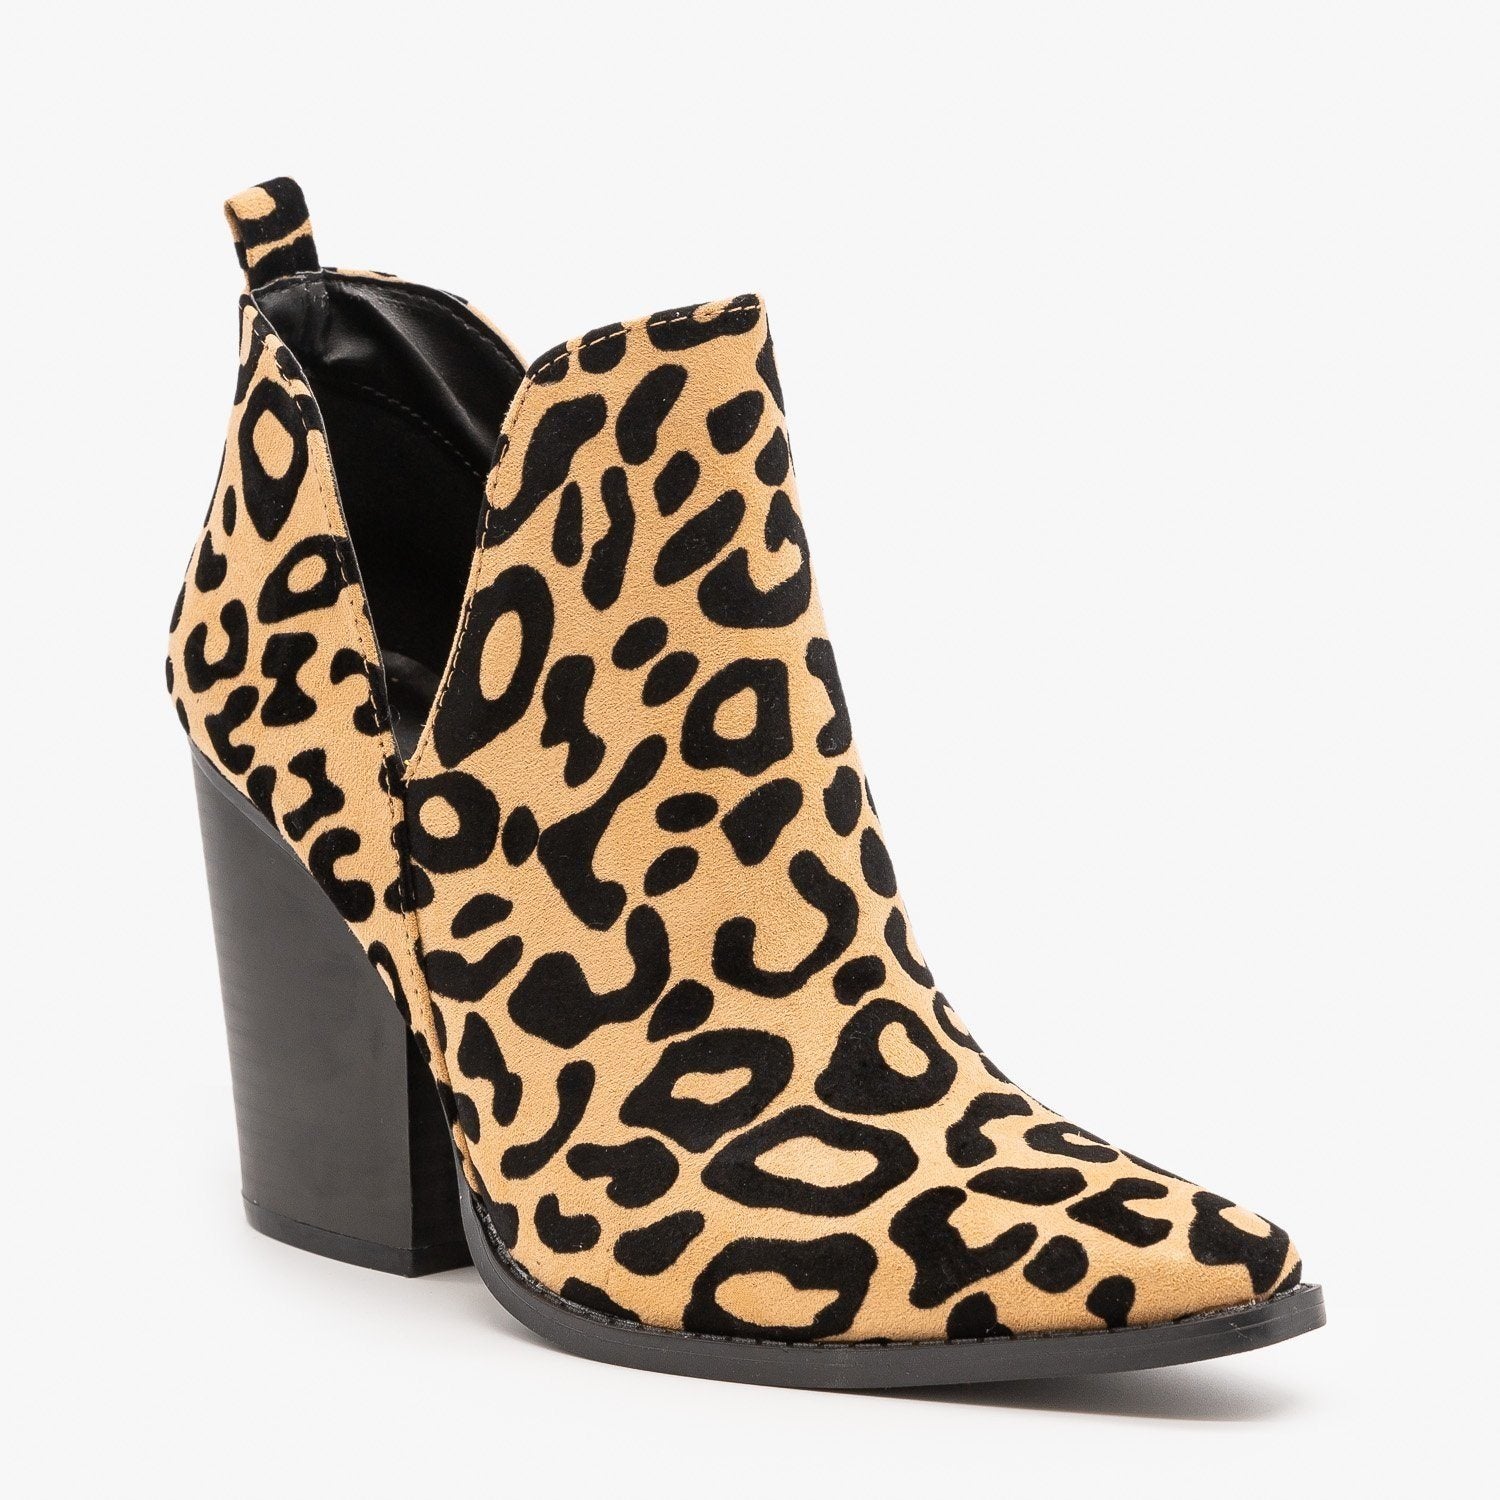 Edgy Leopard Print Booties - Qupid 